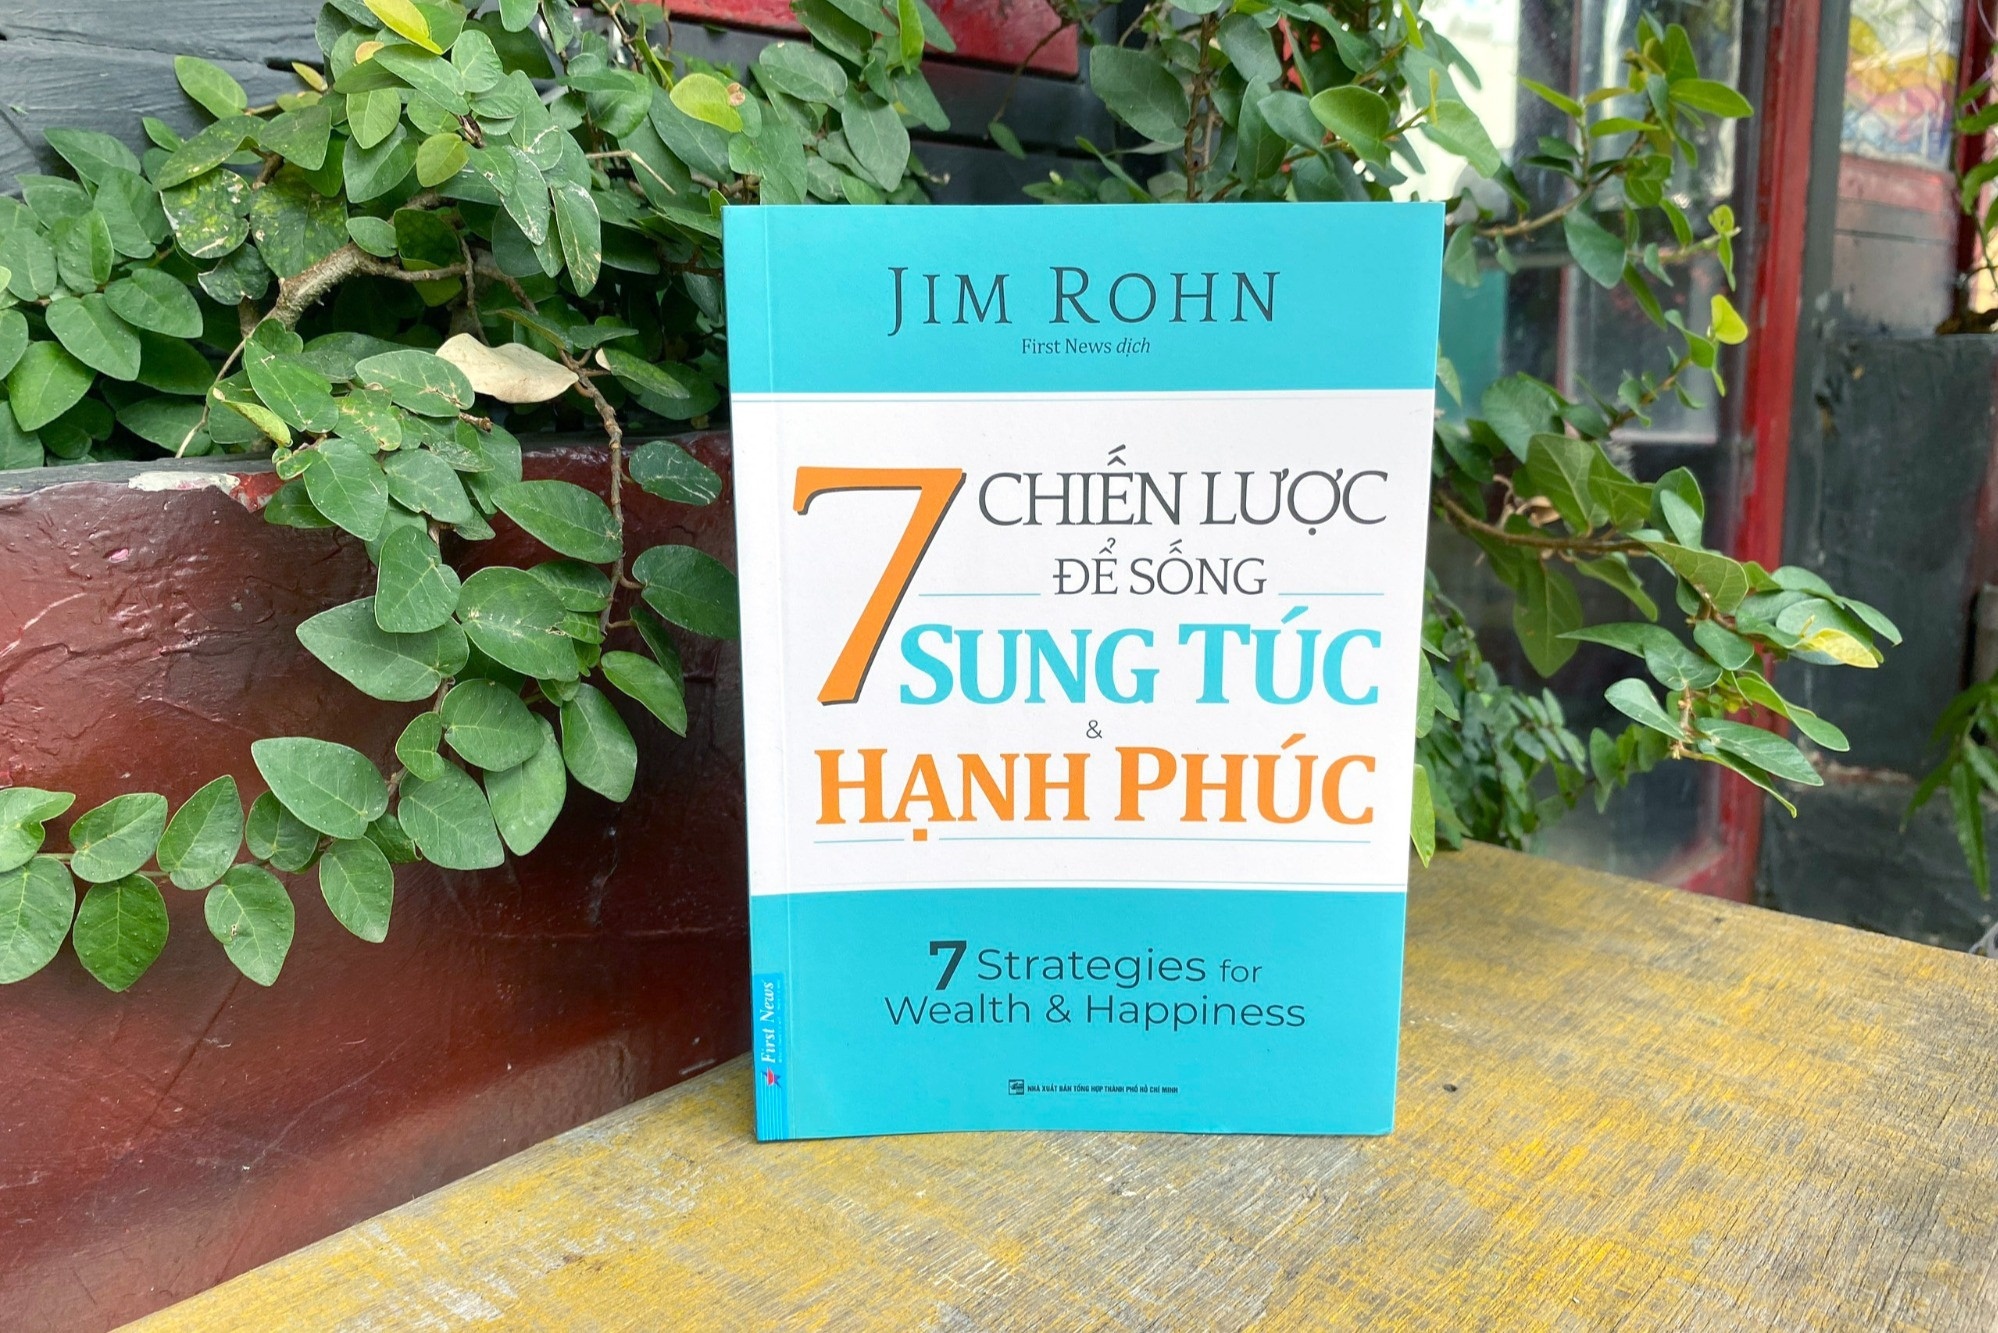 Chien luoc song hanh phuc anh 1